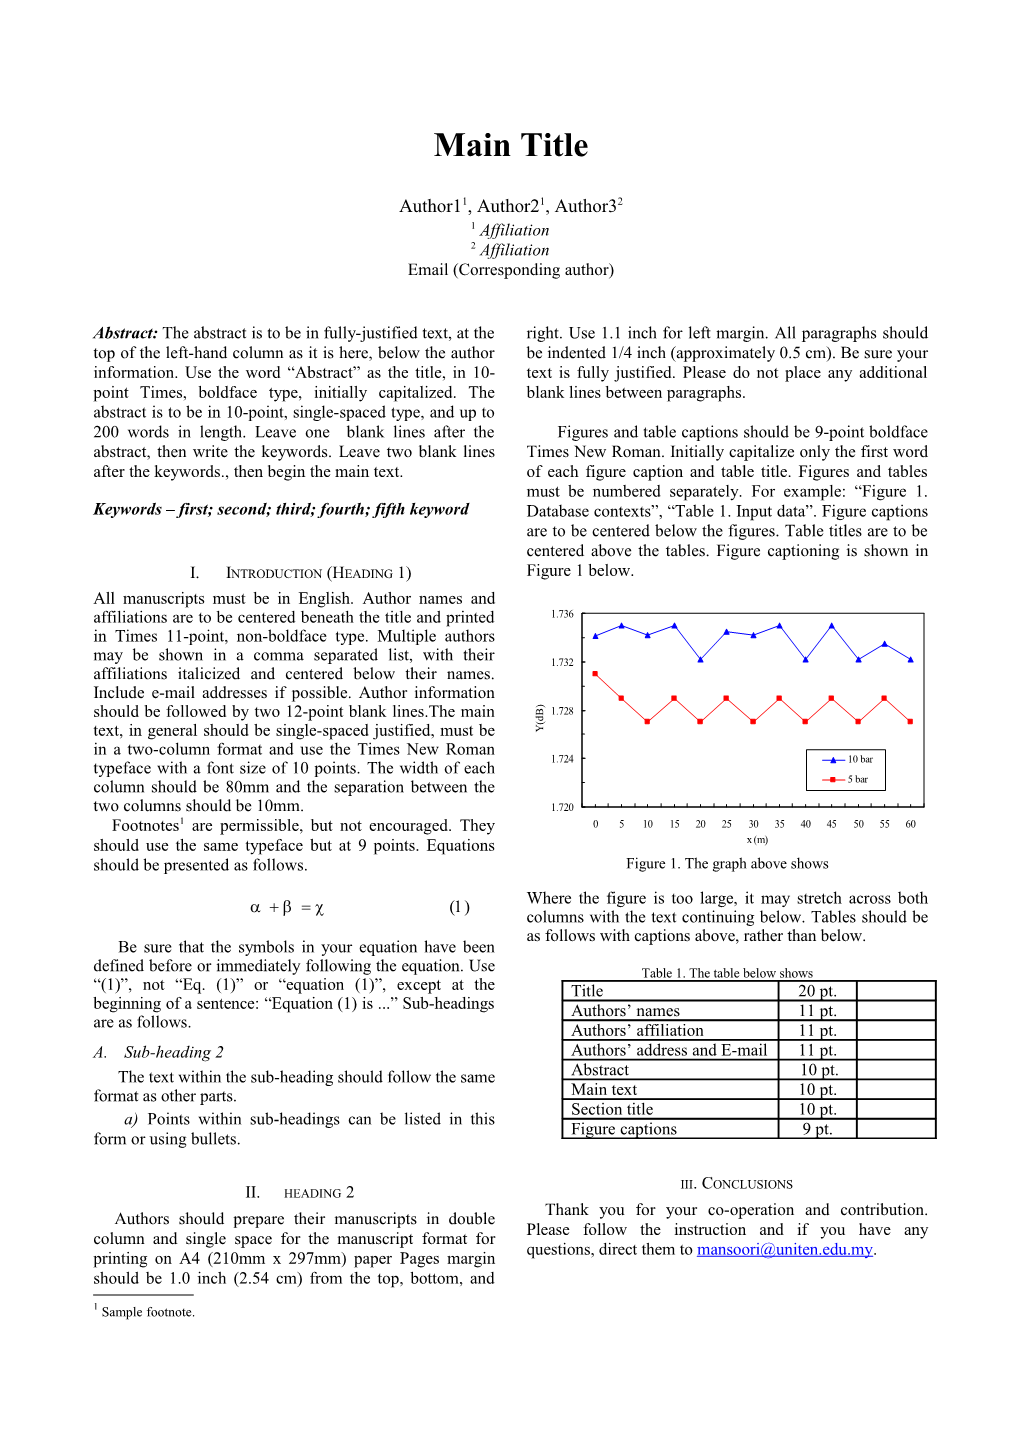 Electronic Journal of Computer Science and Information Technology (Ejcsit), Vol. 2, No. 1, 2010